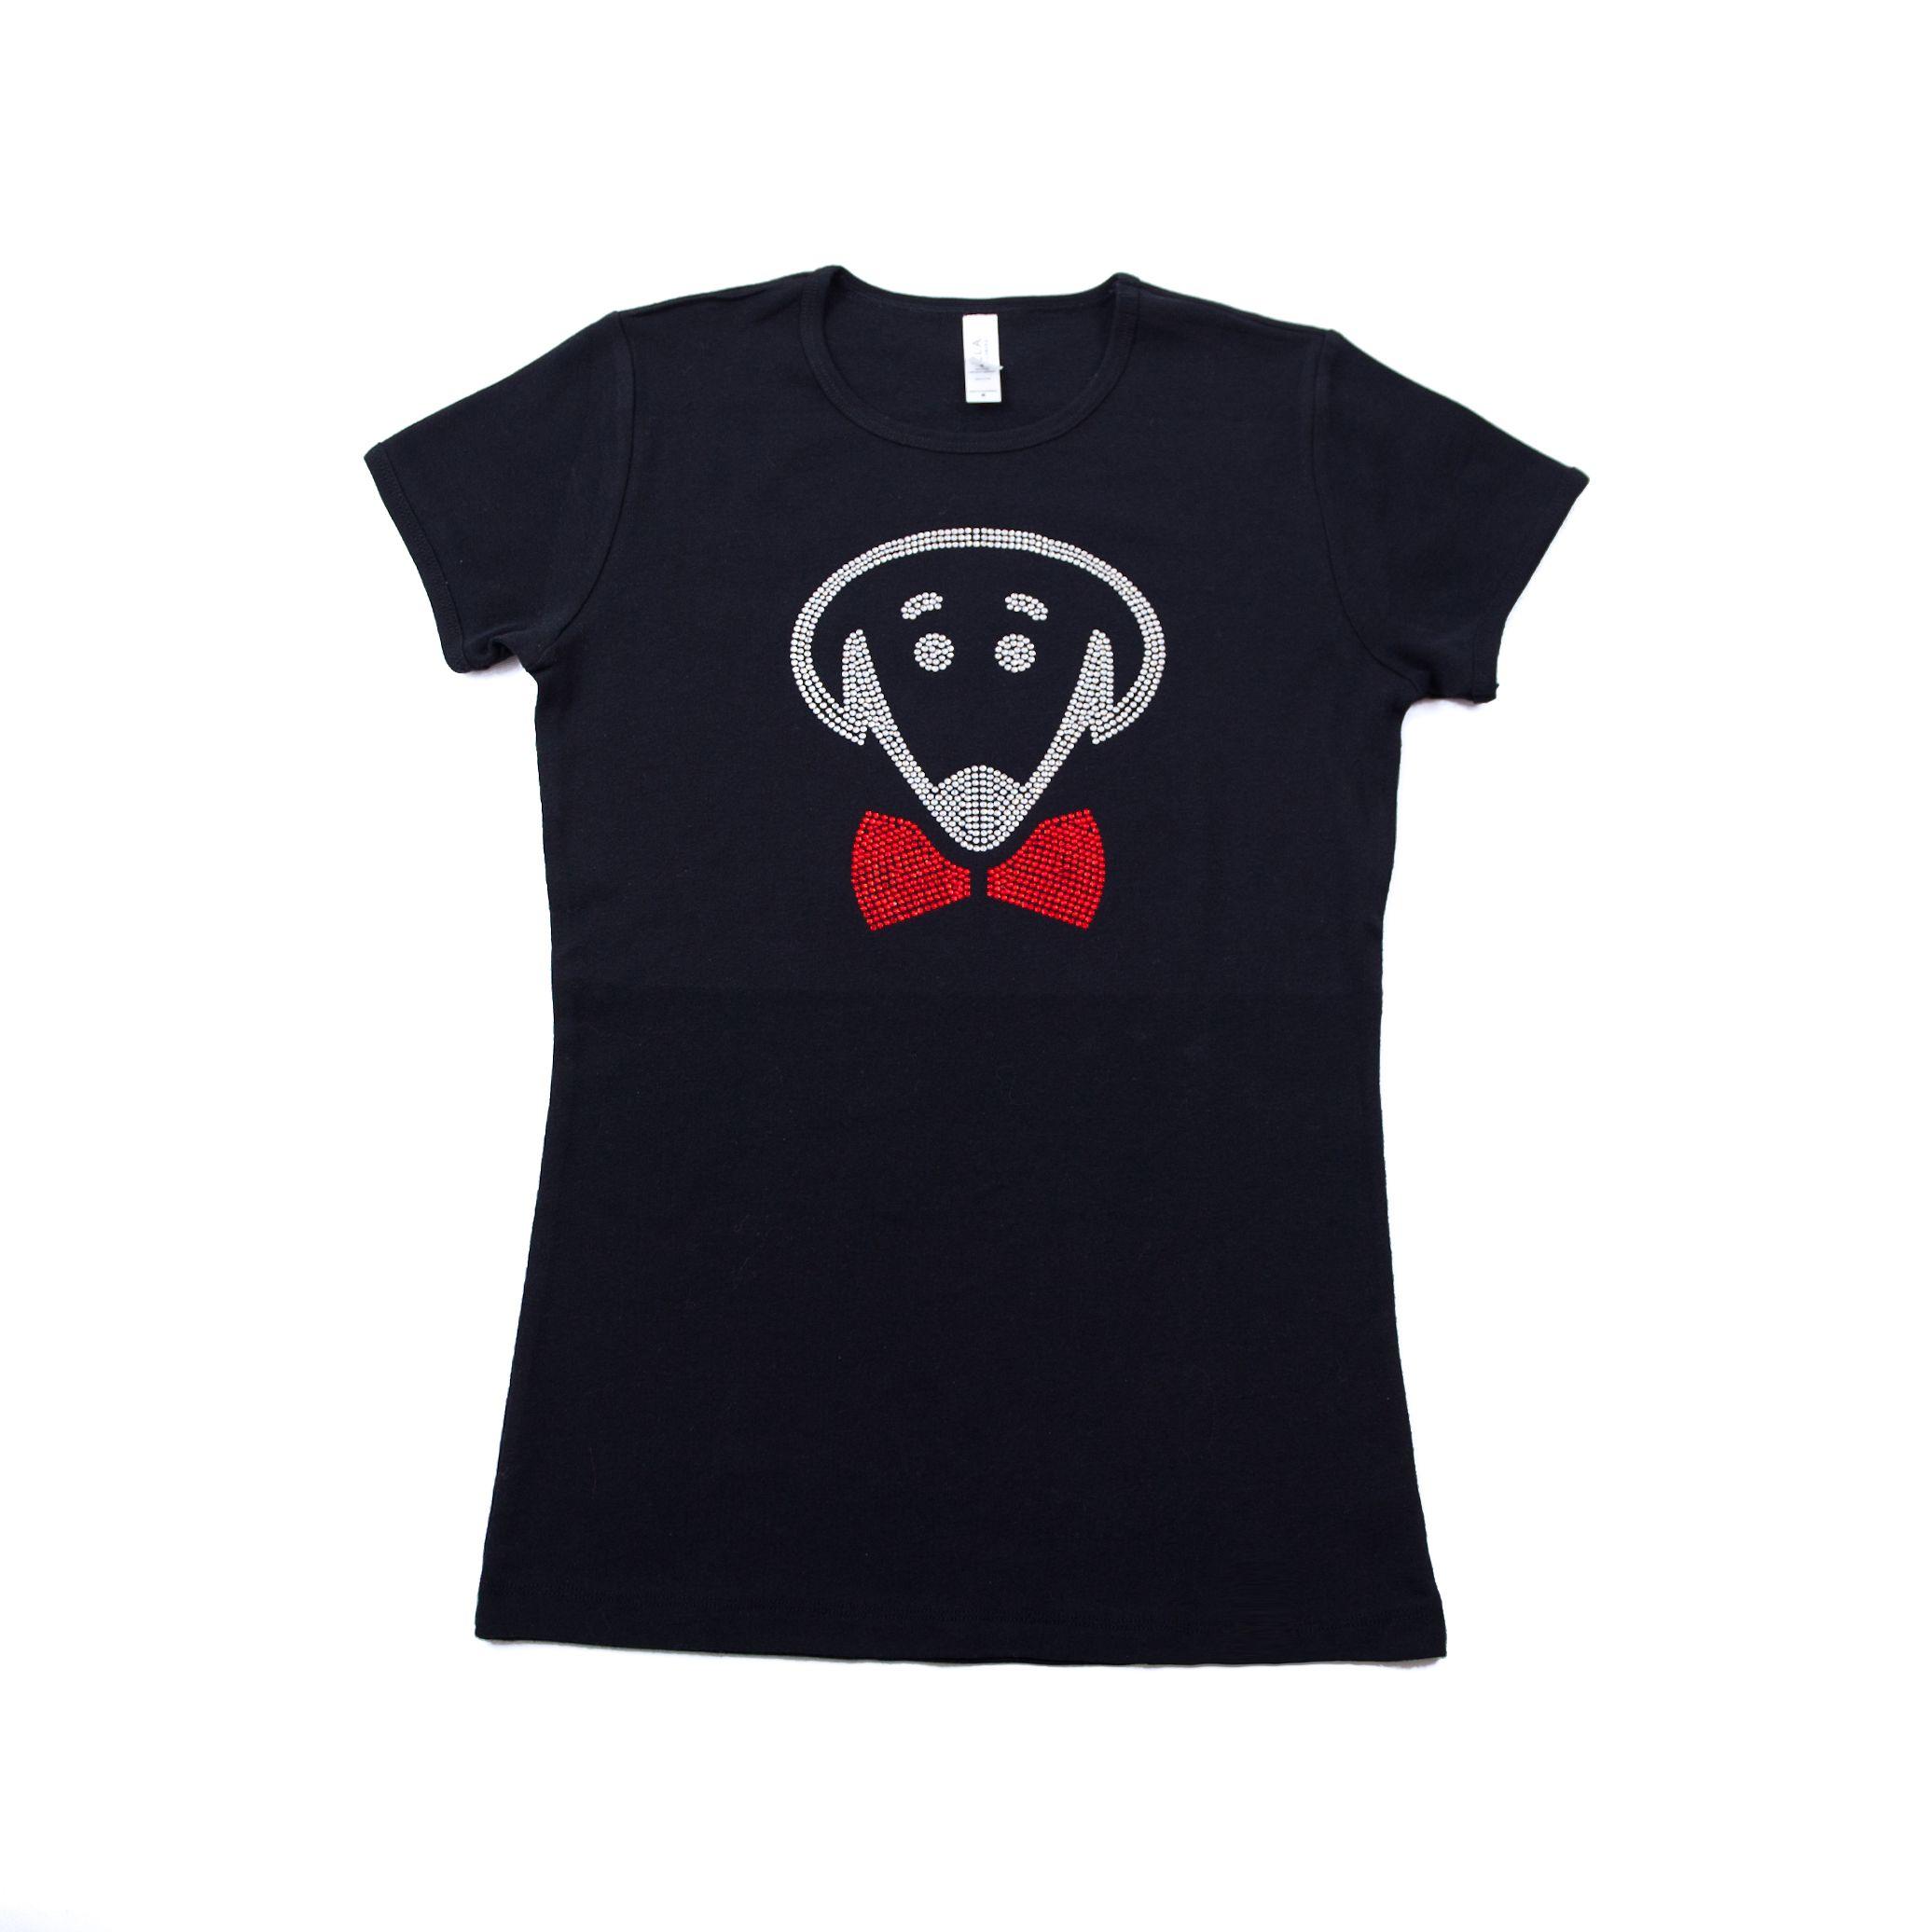 Black Face Logo - Black shirt with bedazzled Bow Ties dog face logo